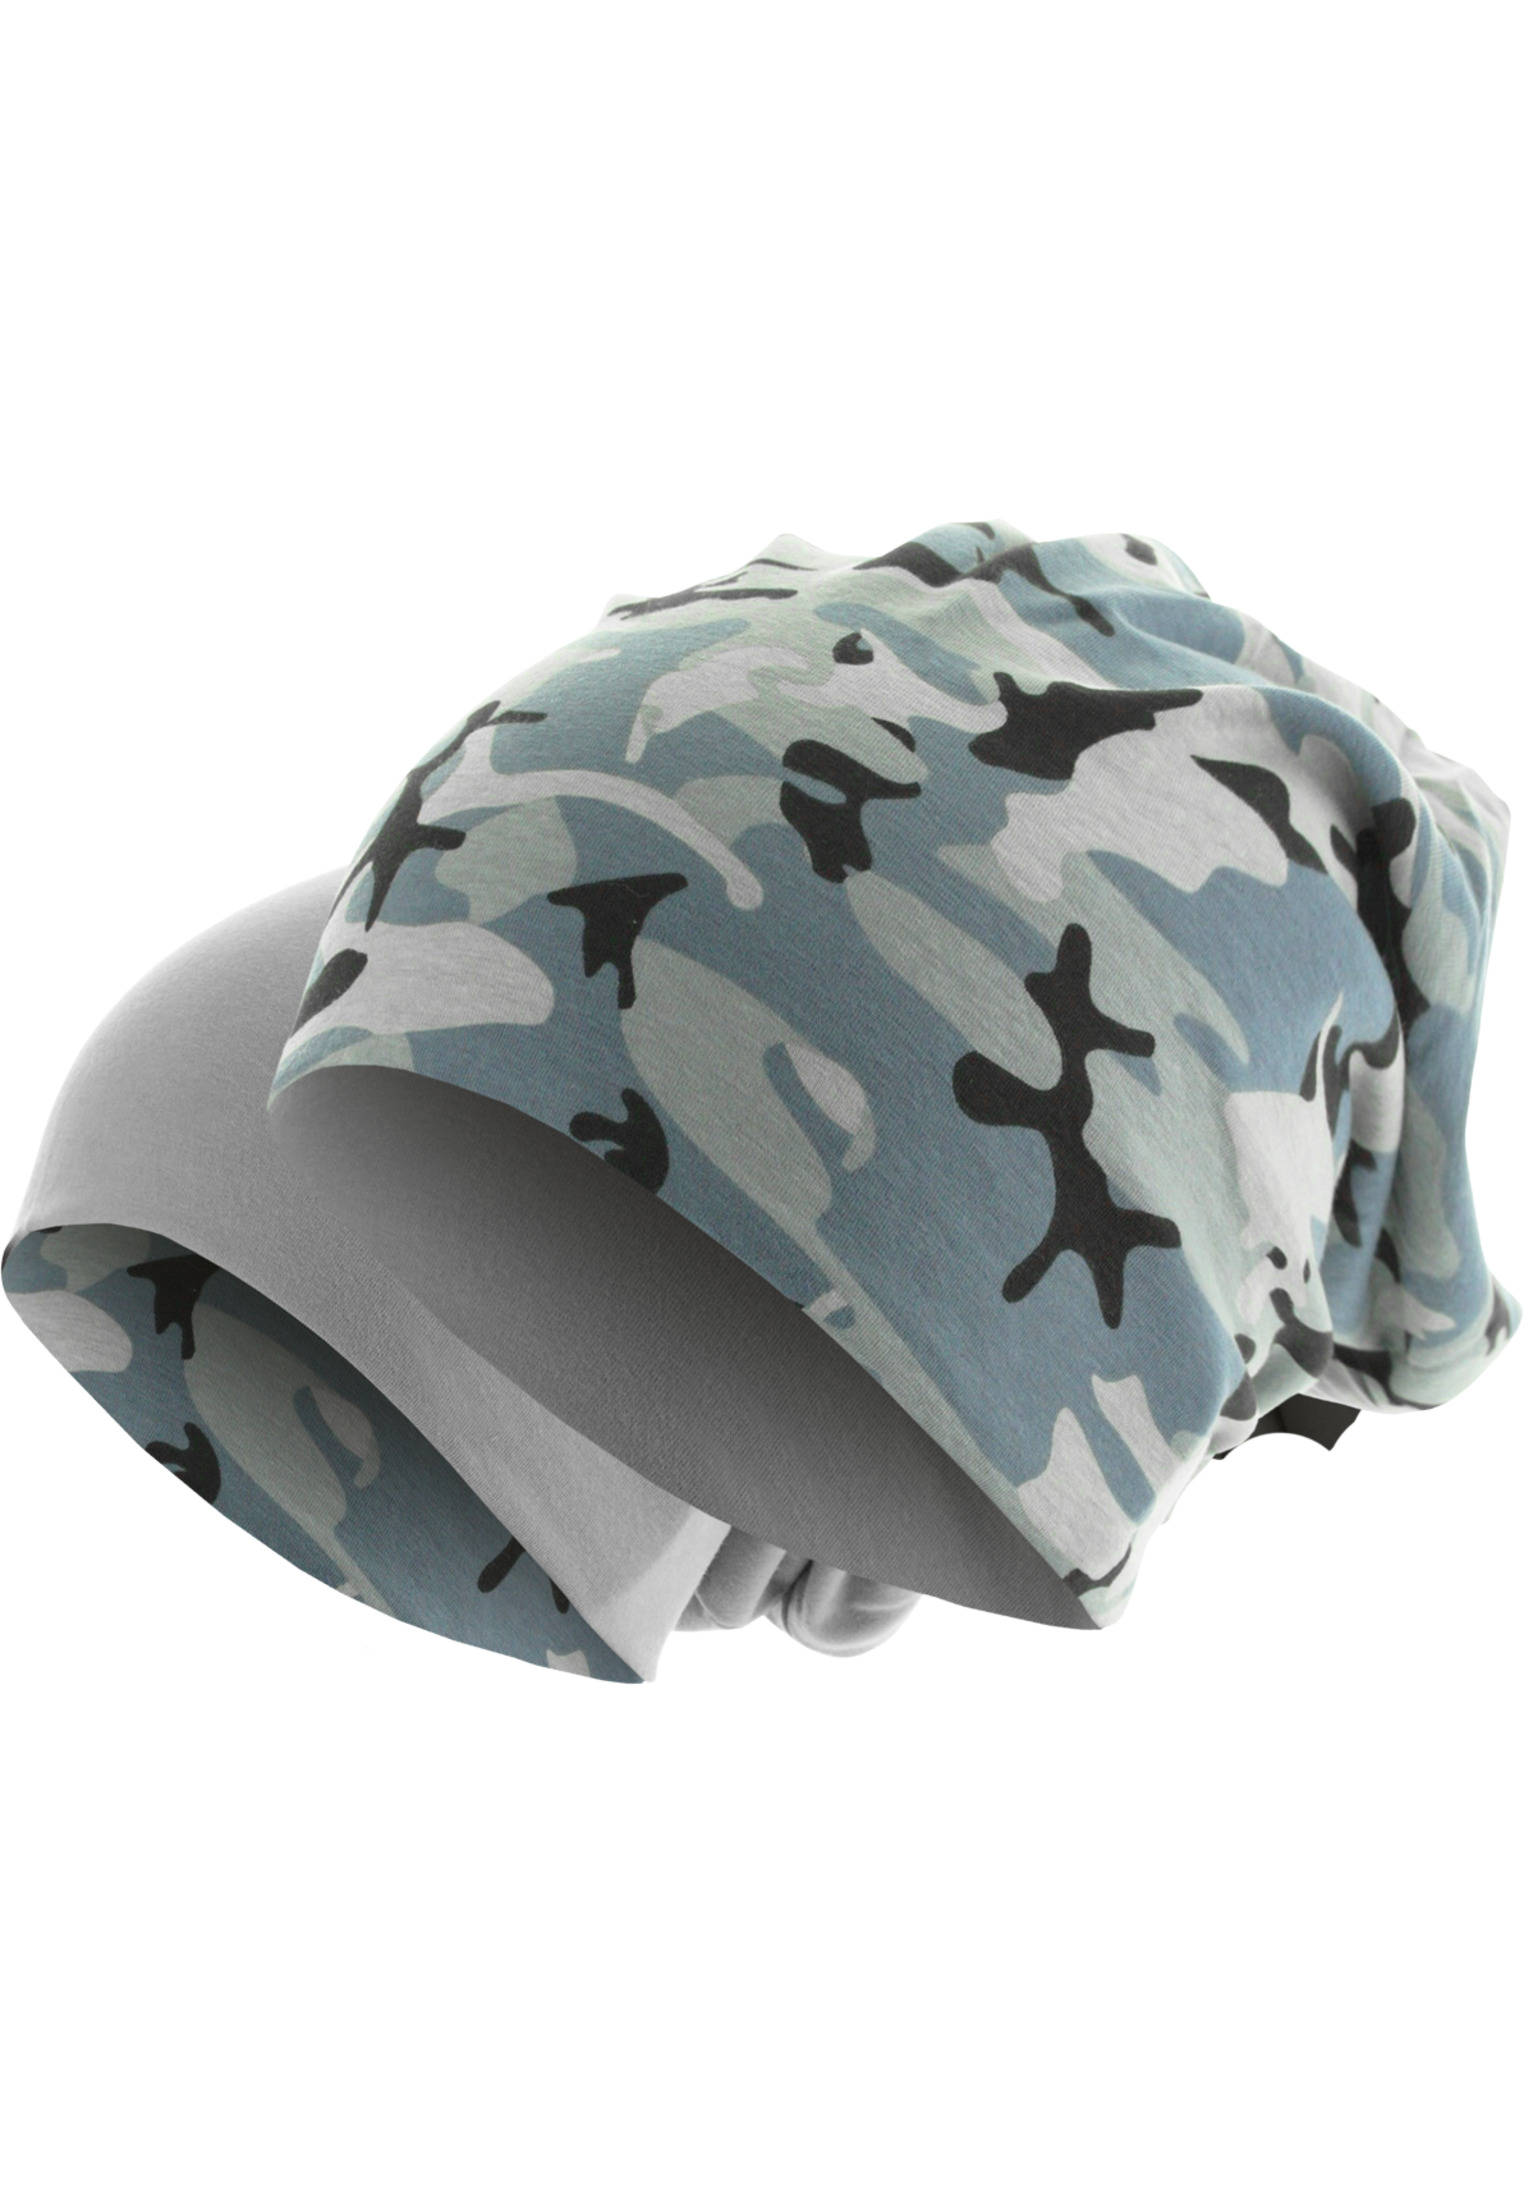 Caps & Beanies Printed Jersey Beanie in Farbe grey camo/charcoal